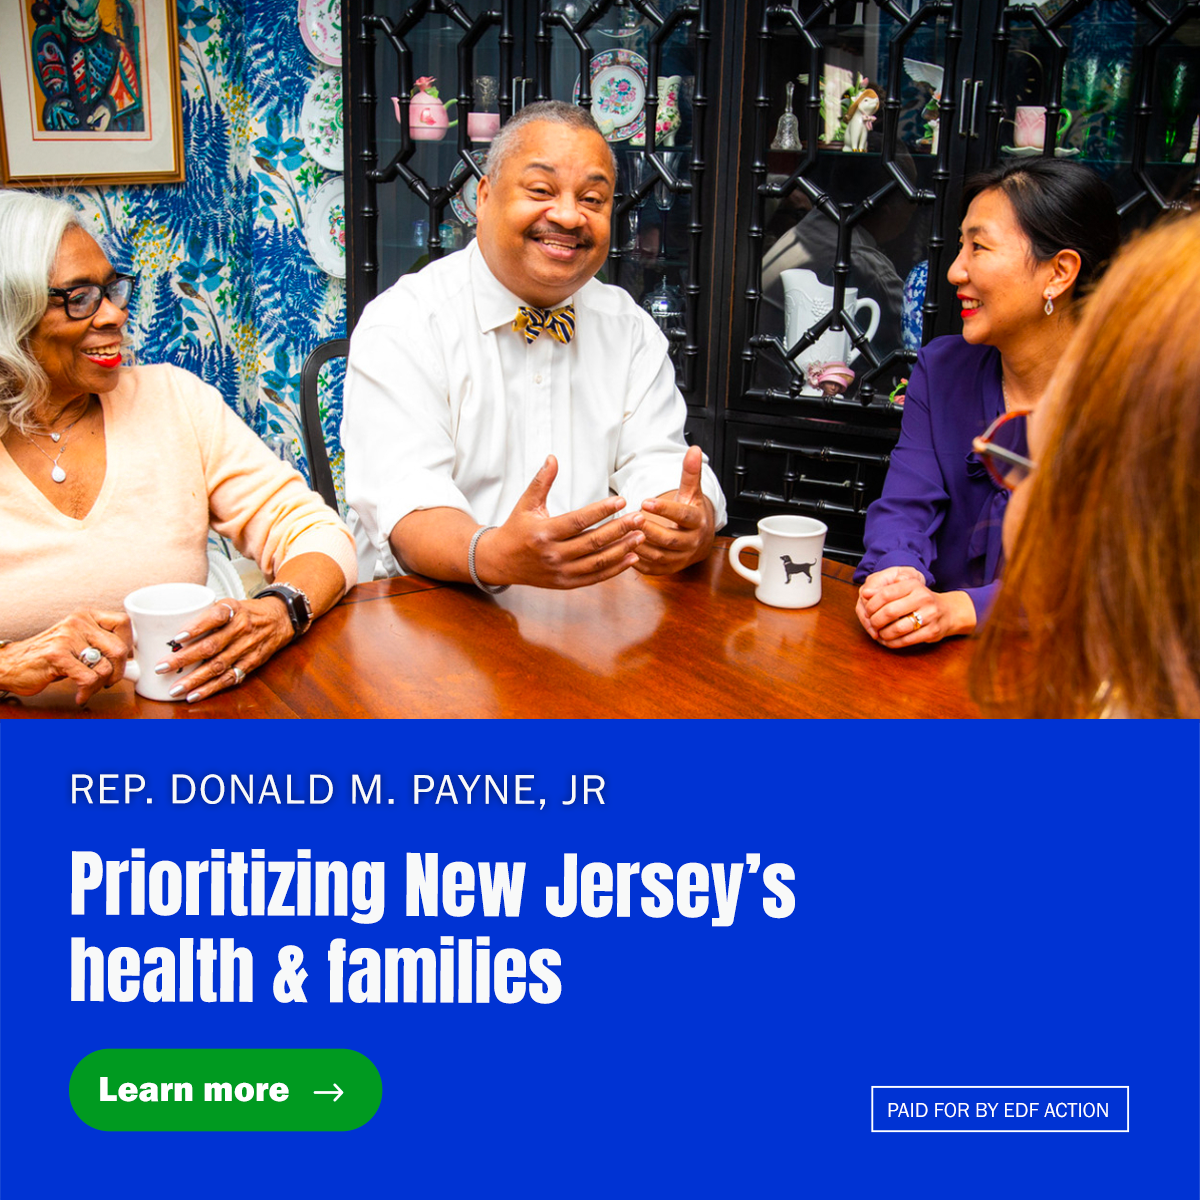 Rep. Payne, Jr. Prioritizing New Jersey's Health & Families